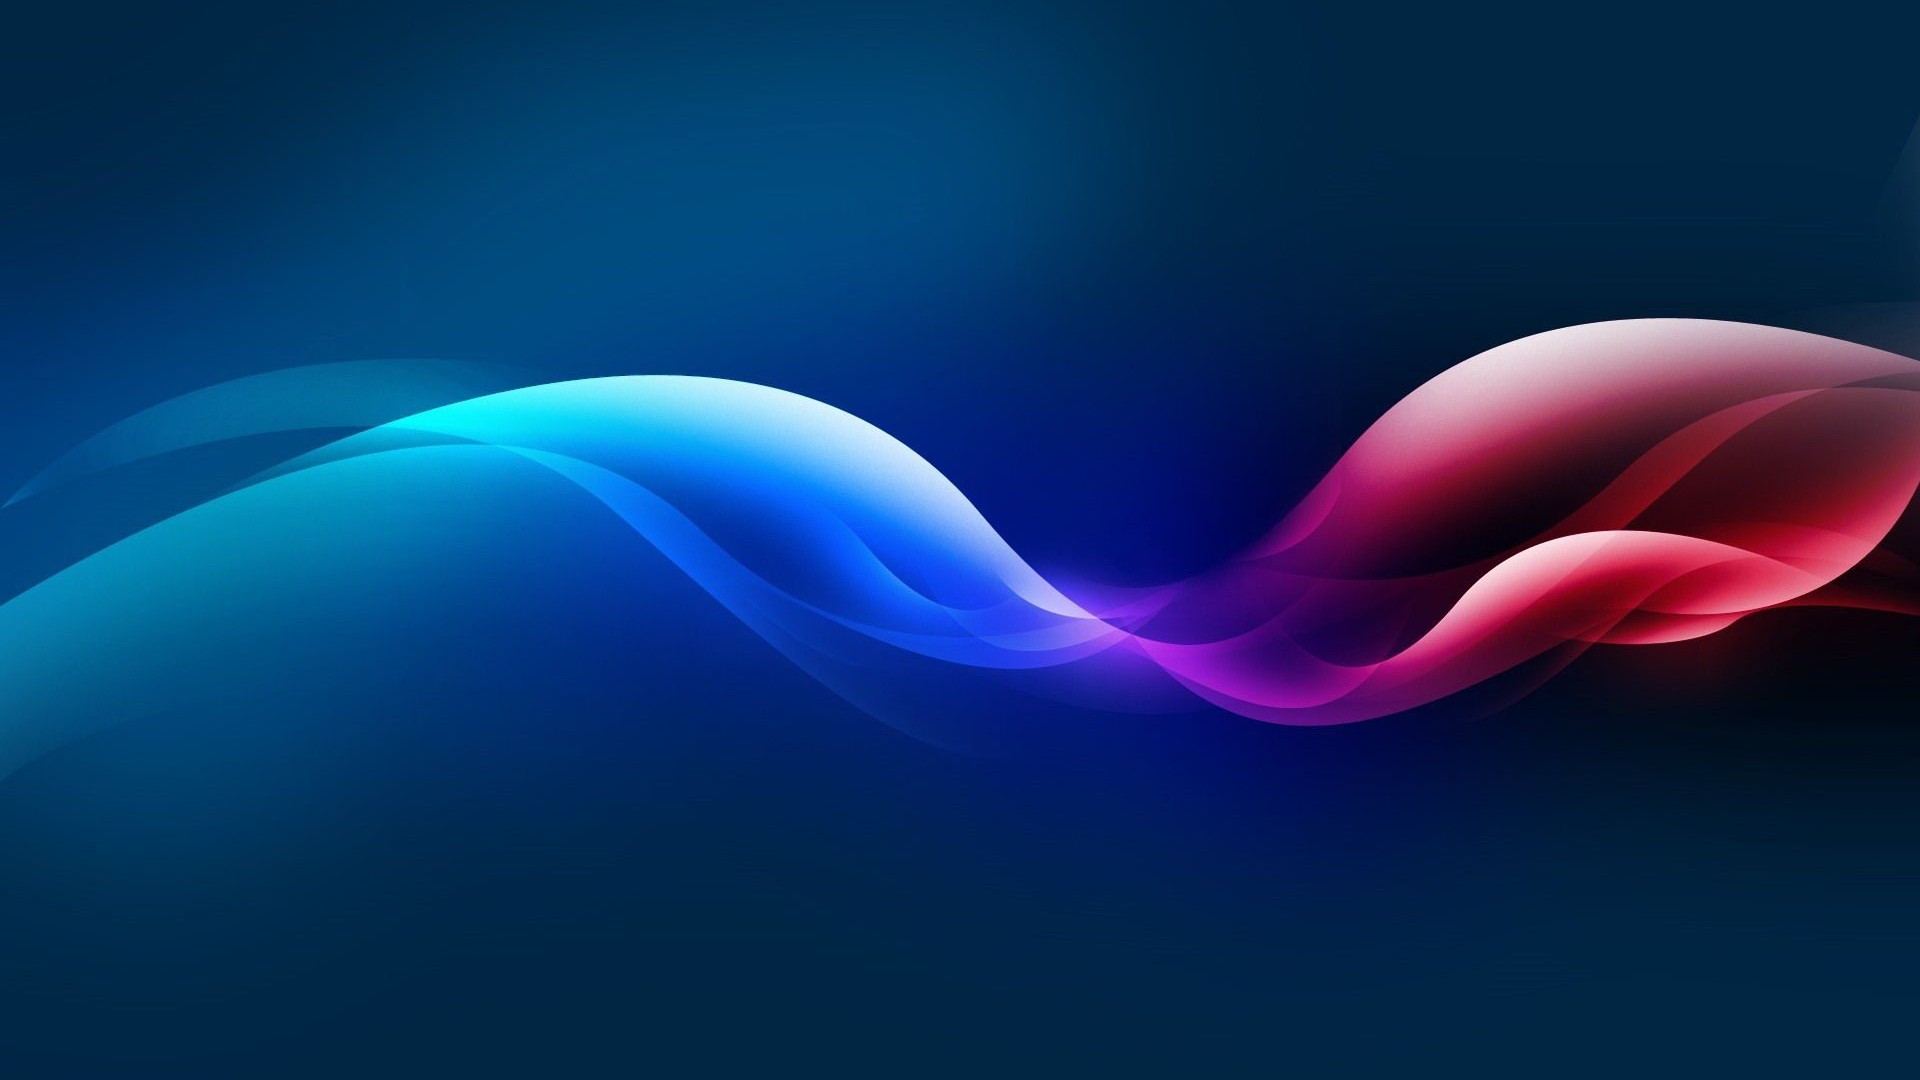 wallpapers light abstract 1920x1080